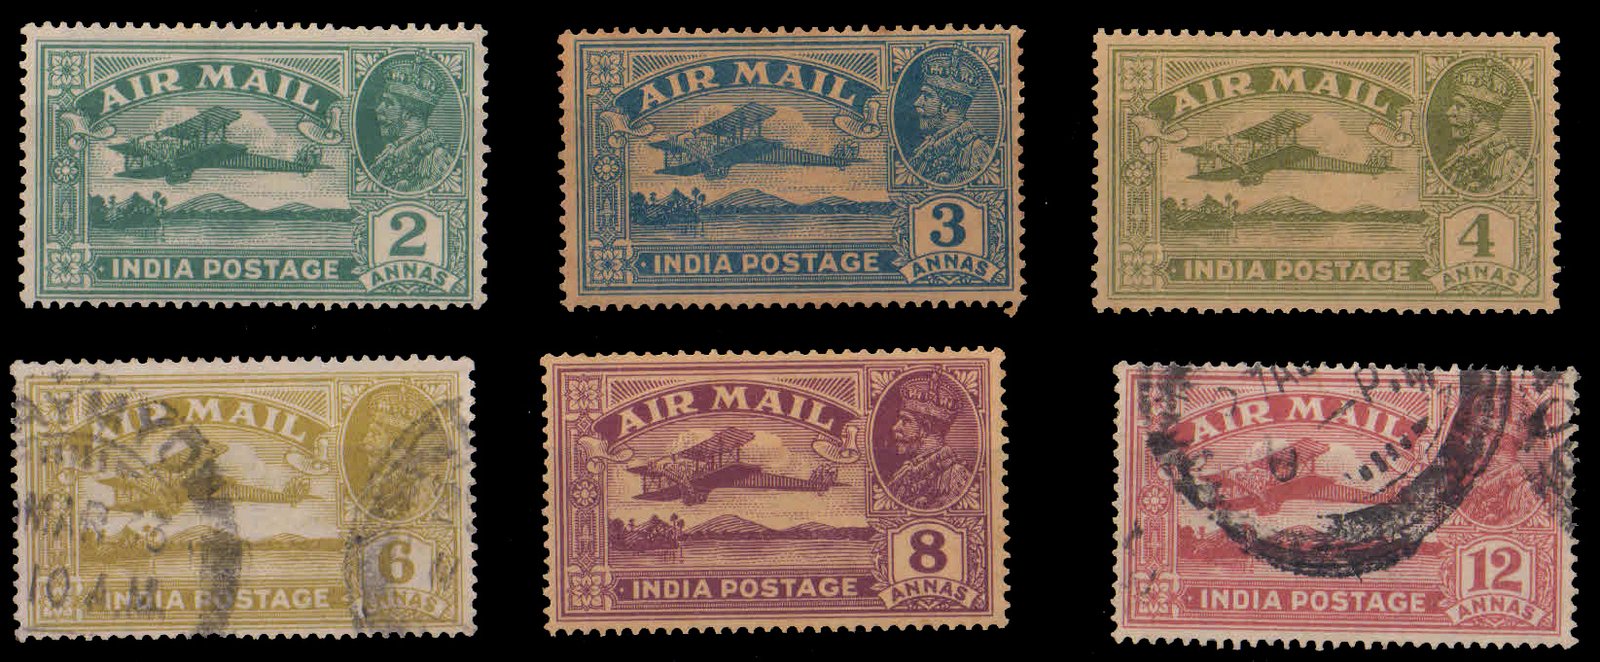 INDIA 1929 - Airmail Series, King George VI, Complete Set of 6, Used Stamps, as per Scan